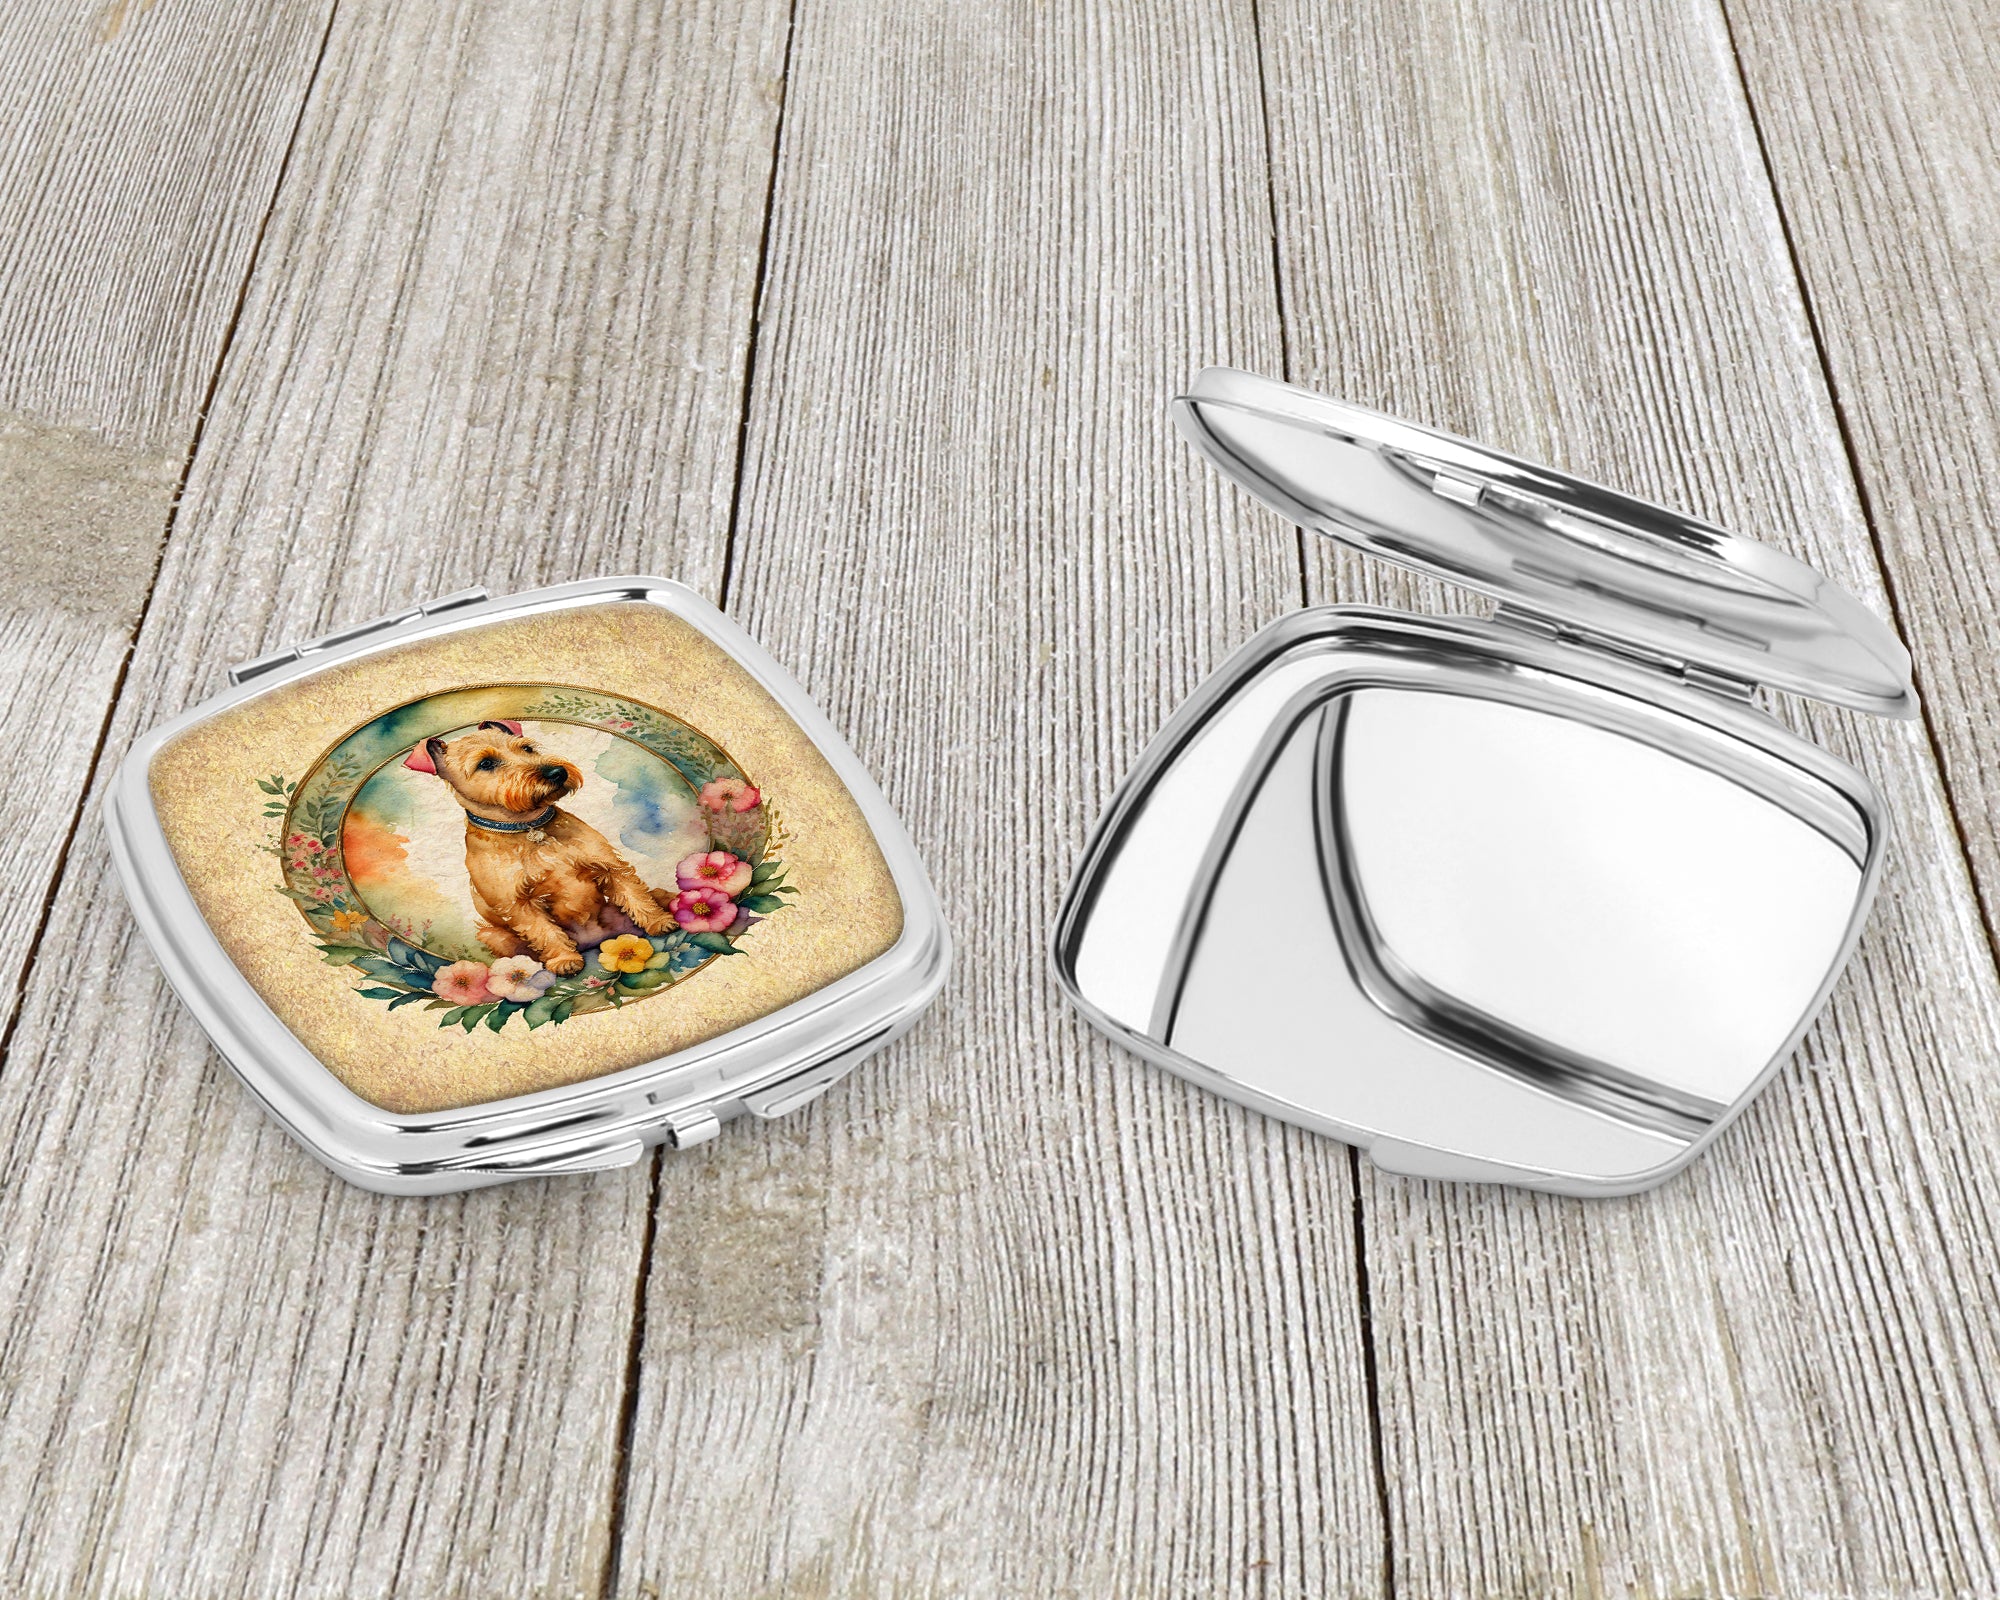 Lakeland Terrier and Flowers Compact Mirror